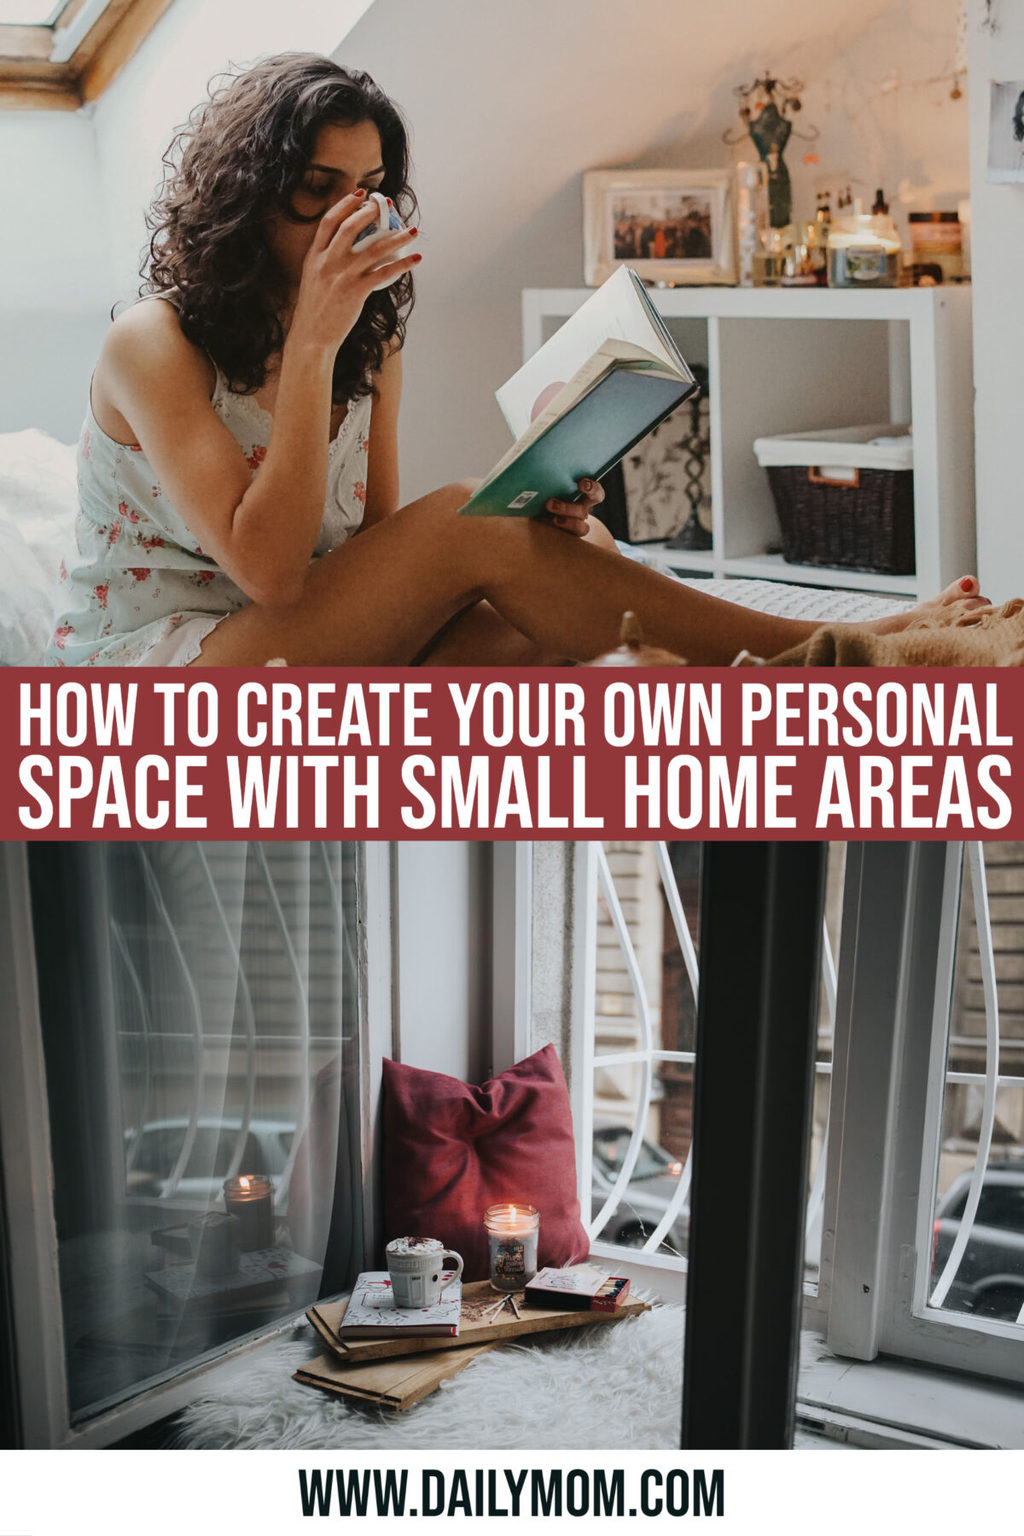 How To Be Resourceful With Little Space And Create Your Own Personal Space